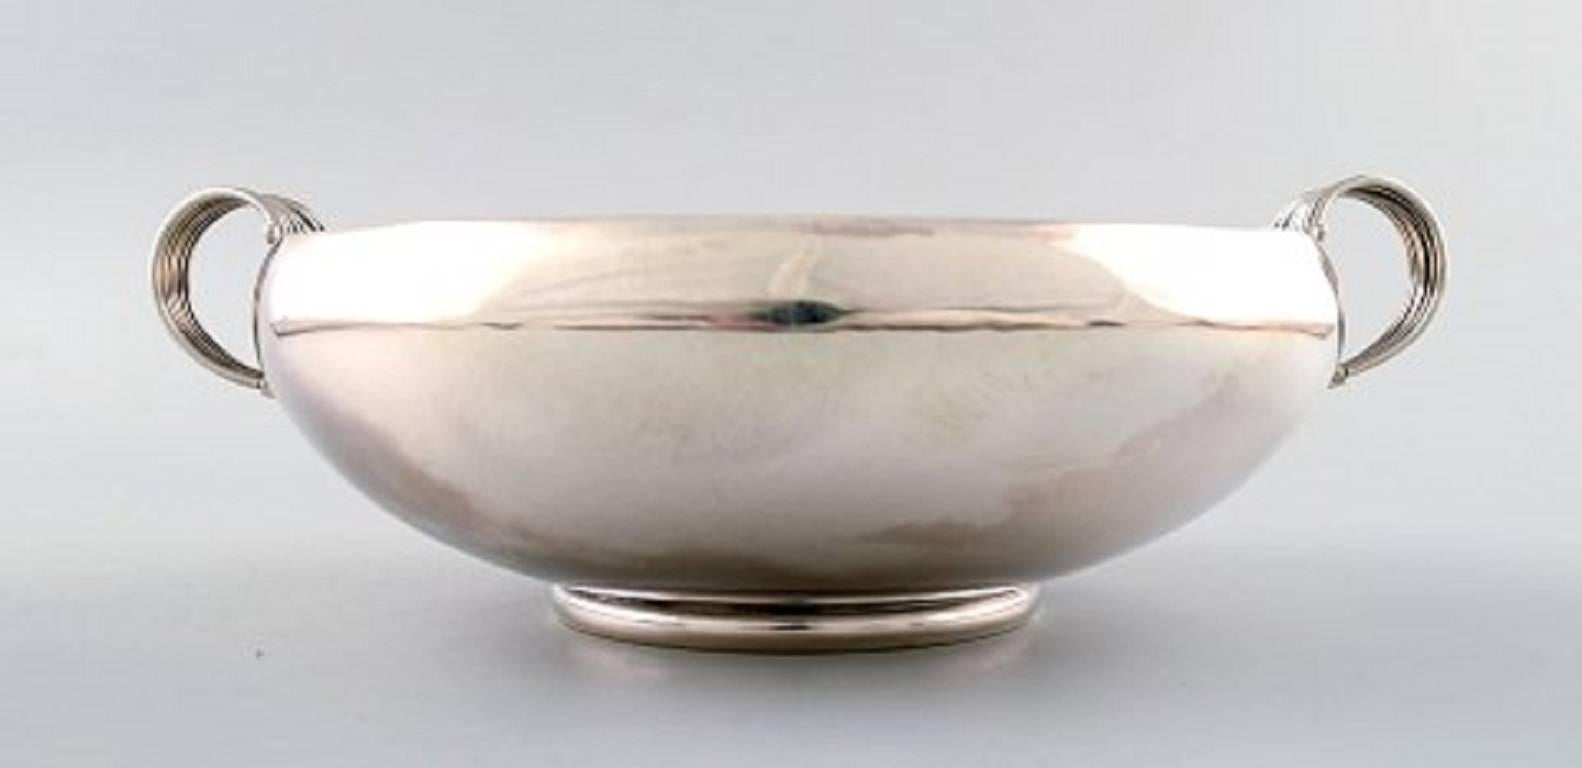 Evald Nielsen, Art Deco large sterling silver bowl.
Measures: 24 cm. x 8 cm.
Stamped: Evald Nielsen Sterling silver.
In perfect condition.
Weight 498 g.